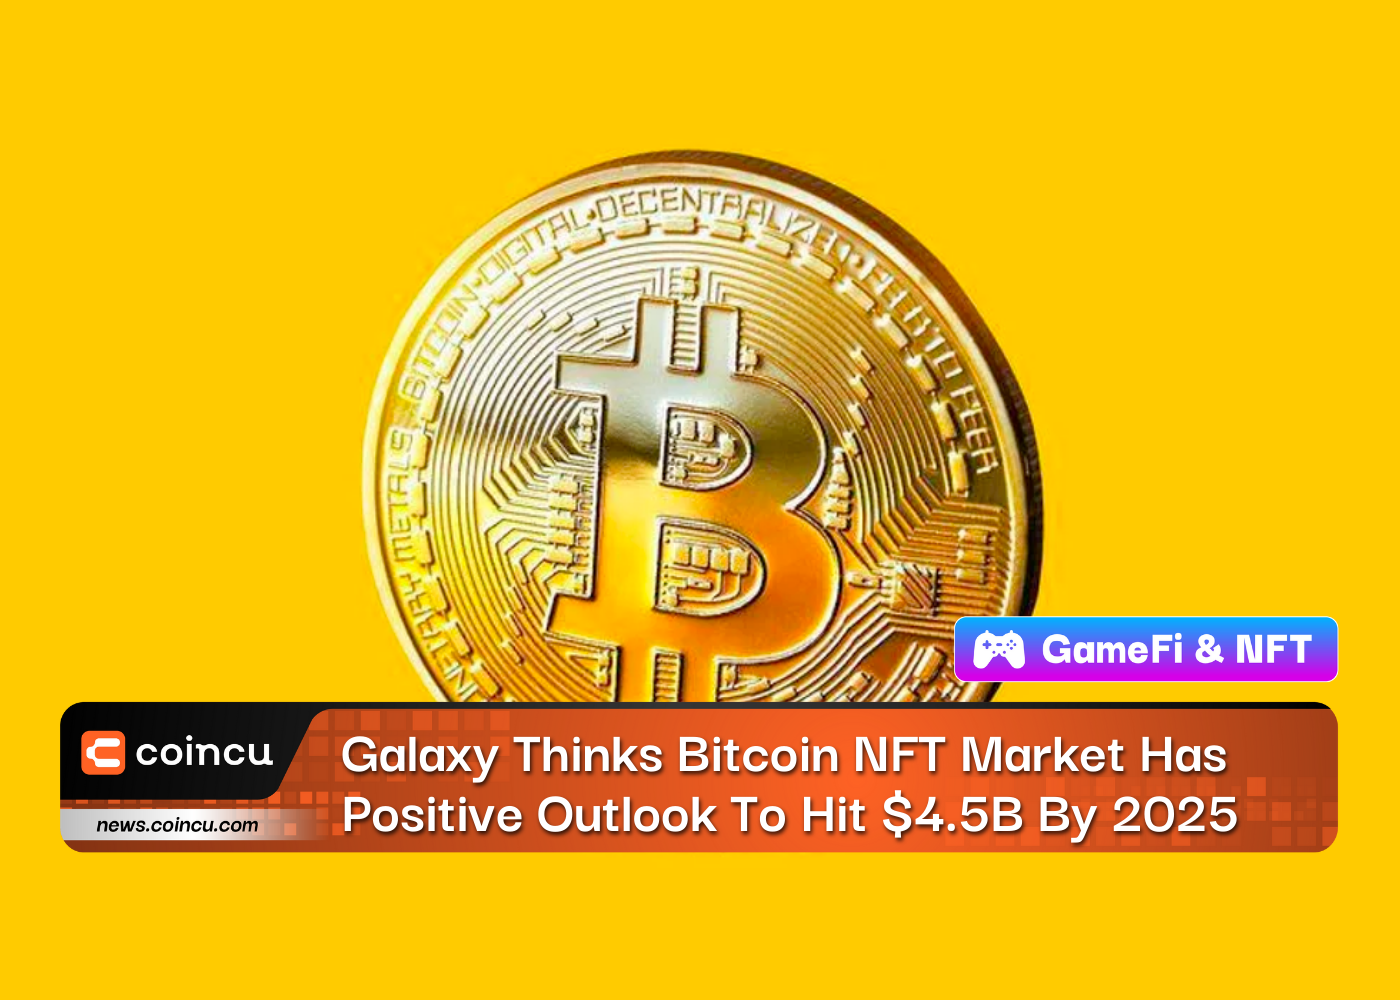 Galaxy Thinks Bitcoin NFT Market Has Positive Outlook To Hit $4.5 Billion By 2025